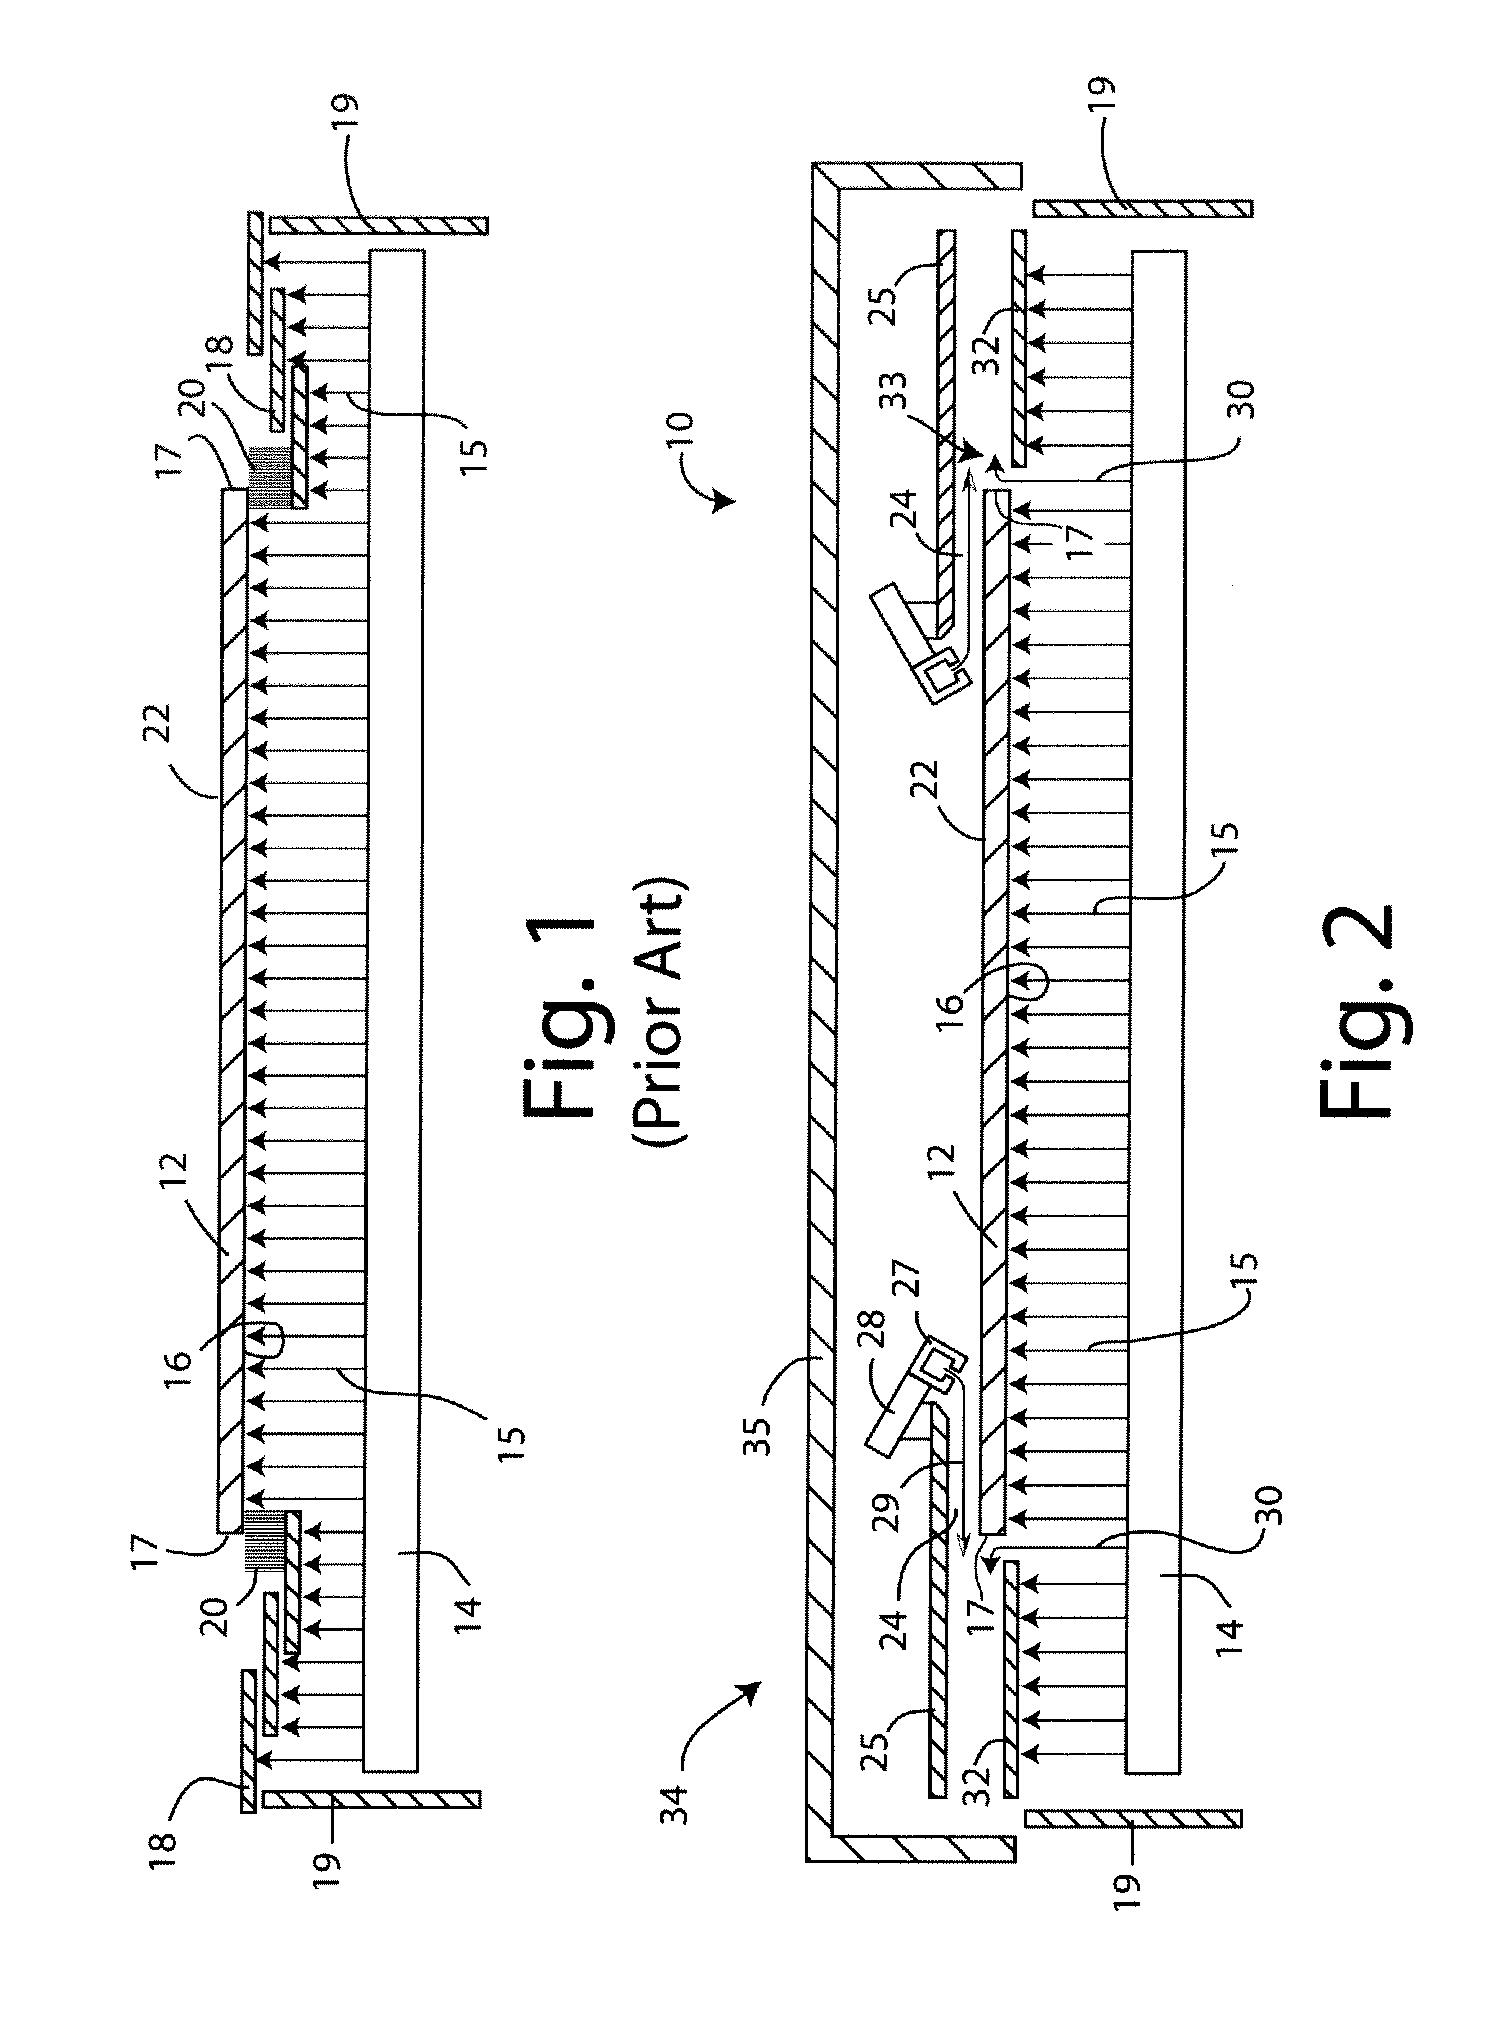 Method and apparatus for removing coolant liquid from moving metal strip